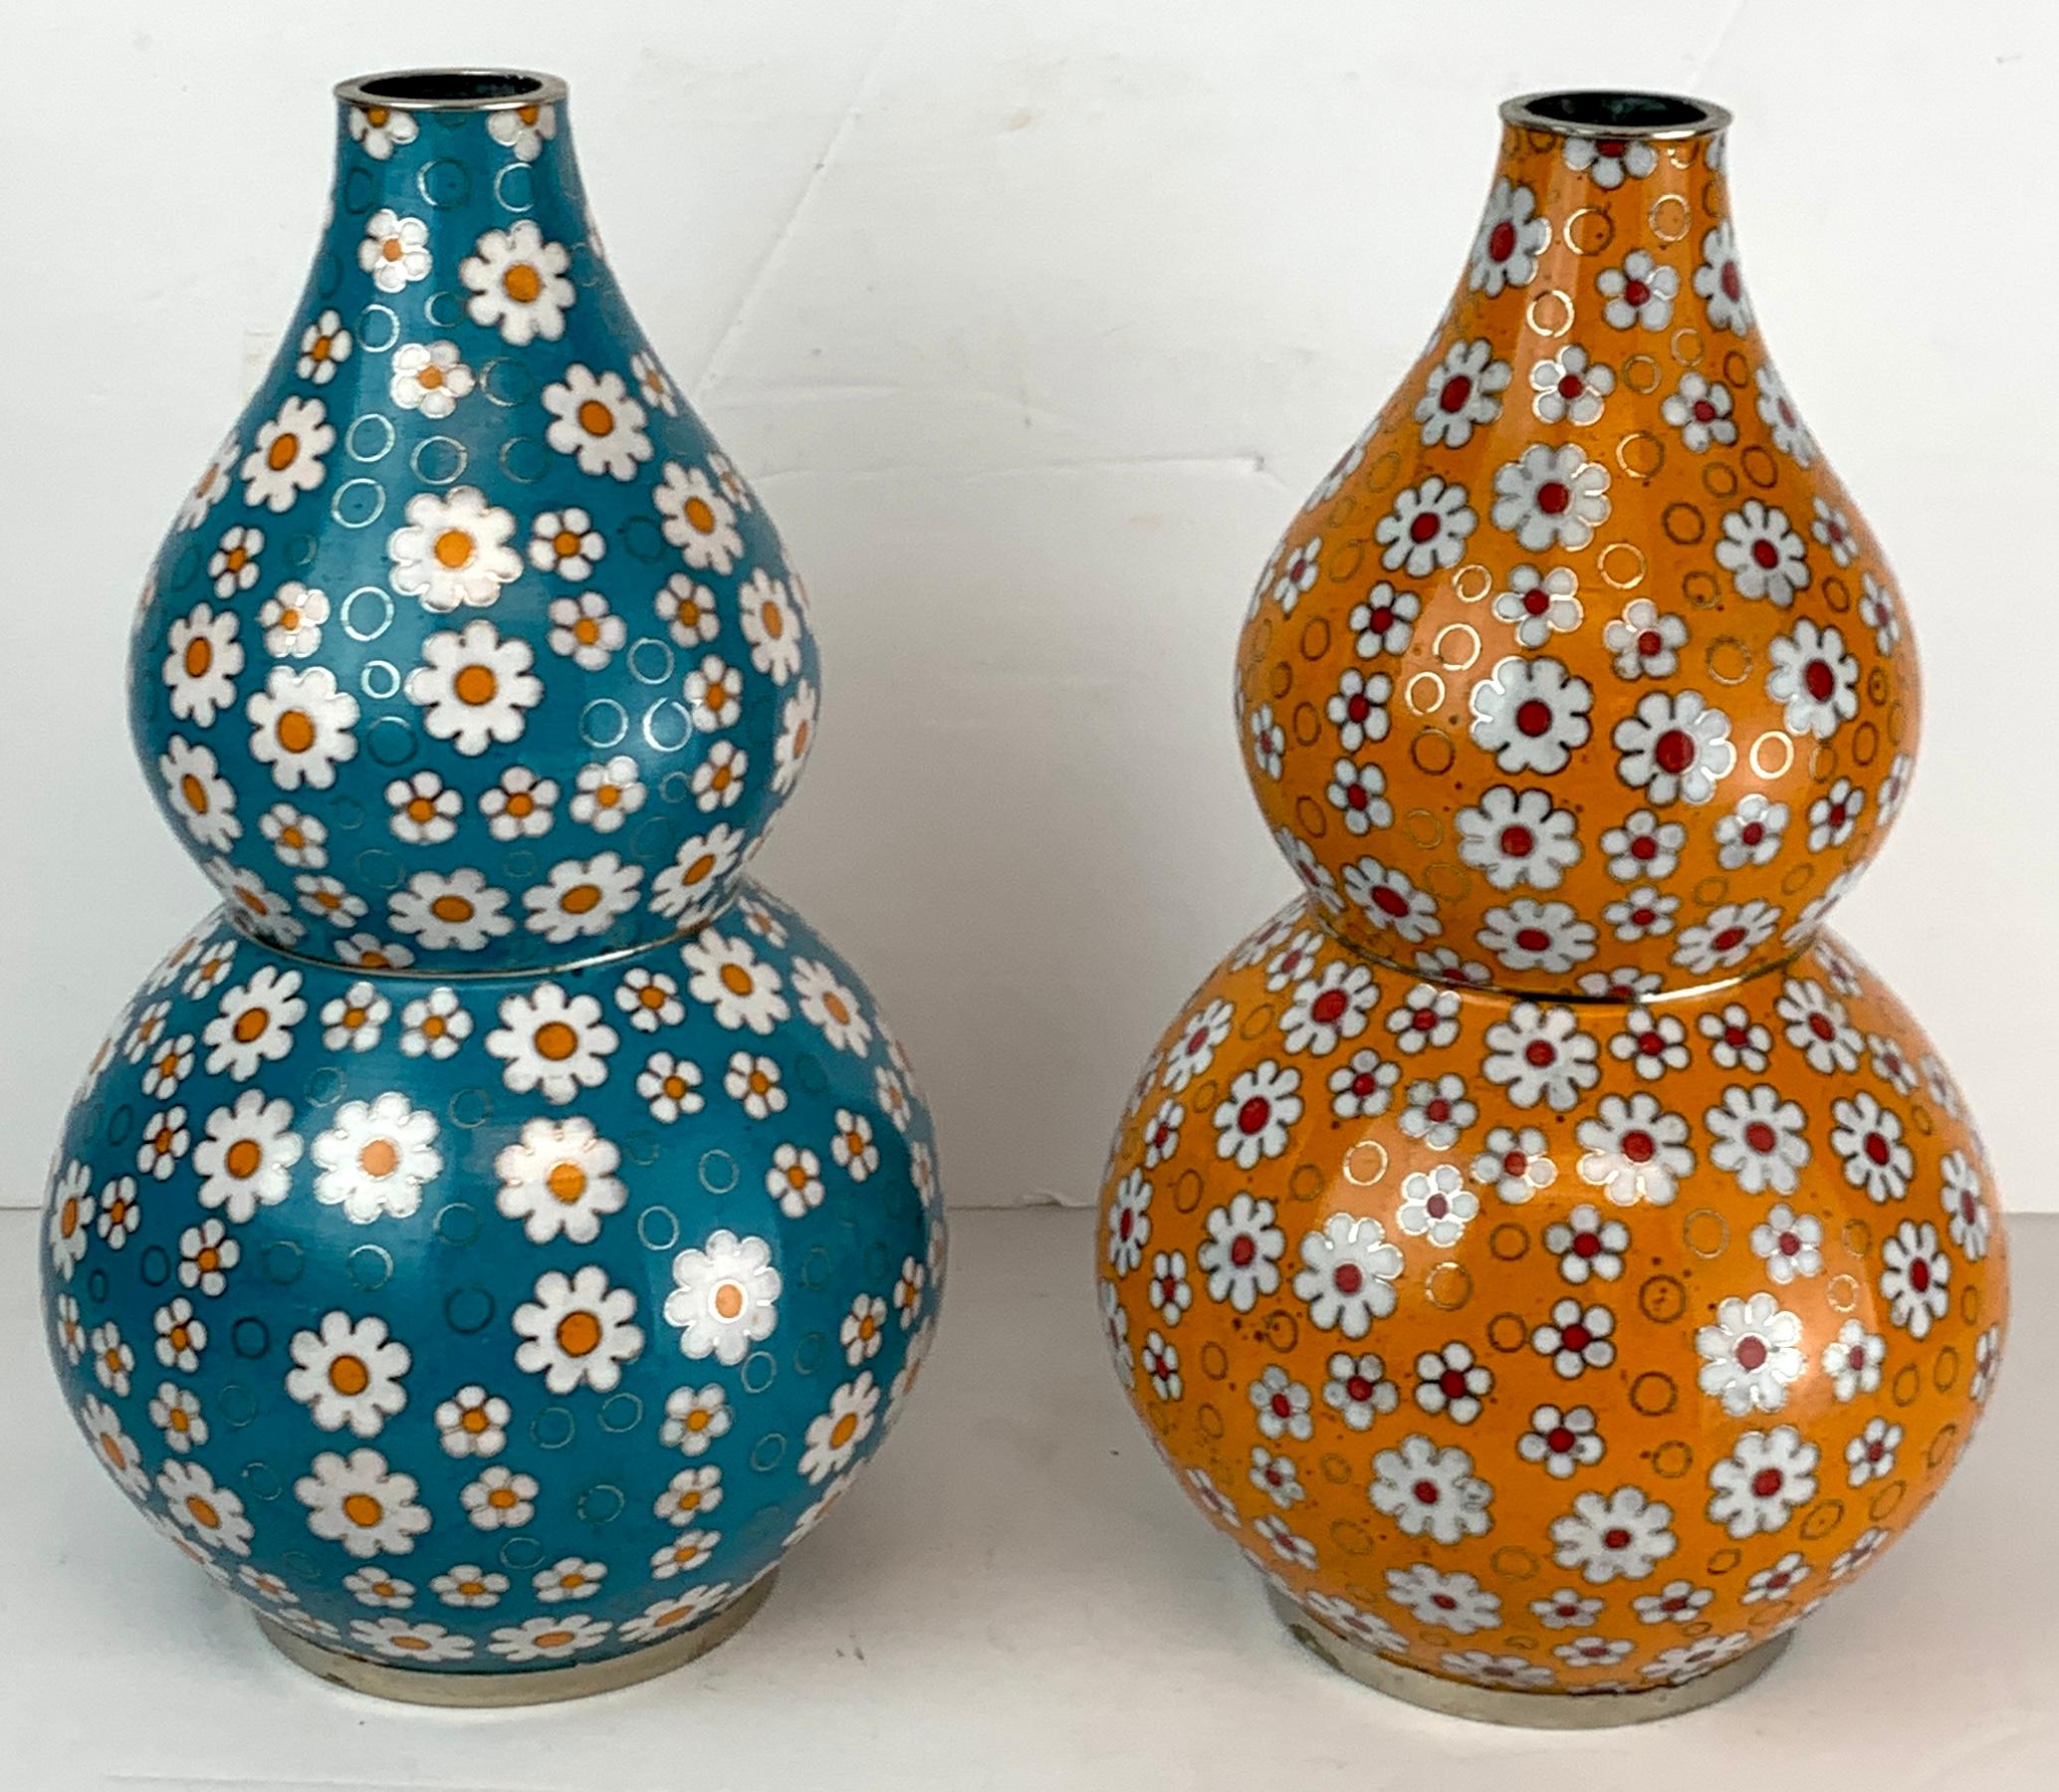 Chinese cloisonné daisy motif double gourd vases attributed, Fabienne Jouvine, sold individually.
Each one profusely decorated with daisy's and rings. One vase with blue background, one with orange background. Please specify by color (Blue or